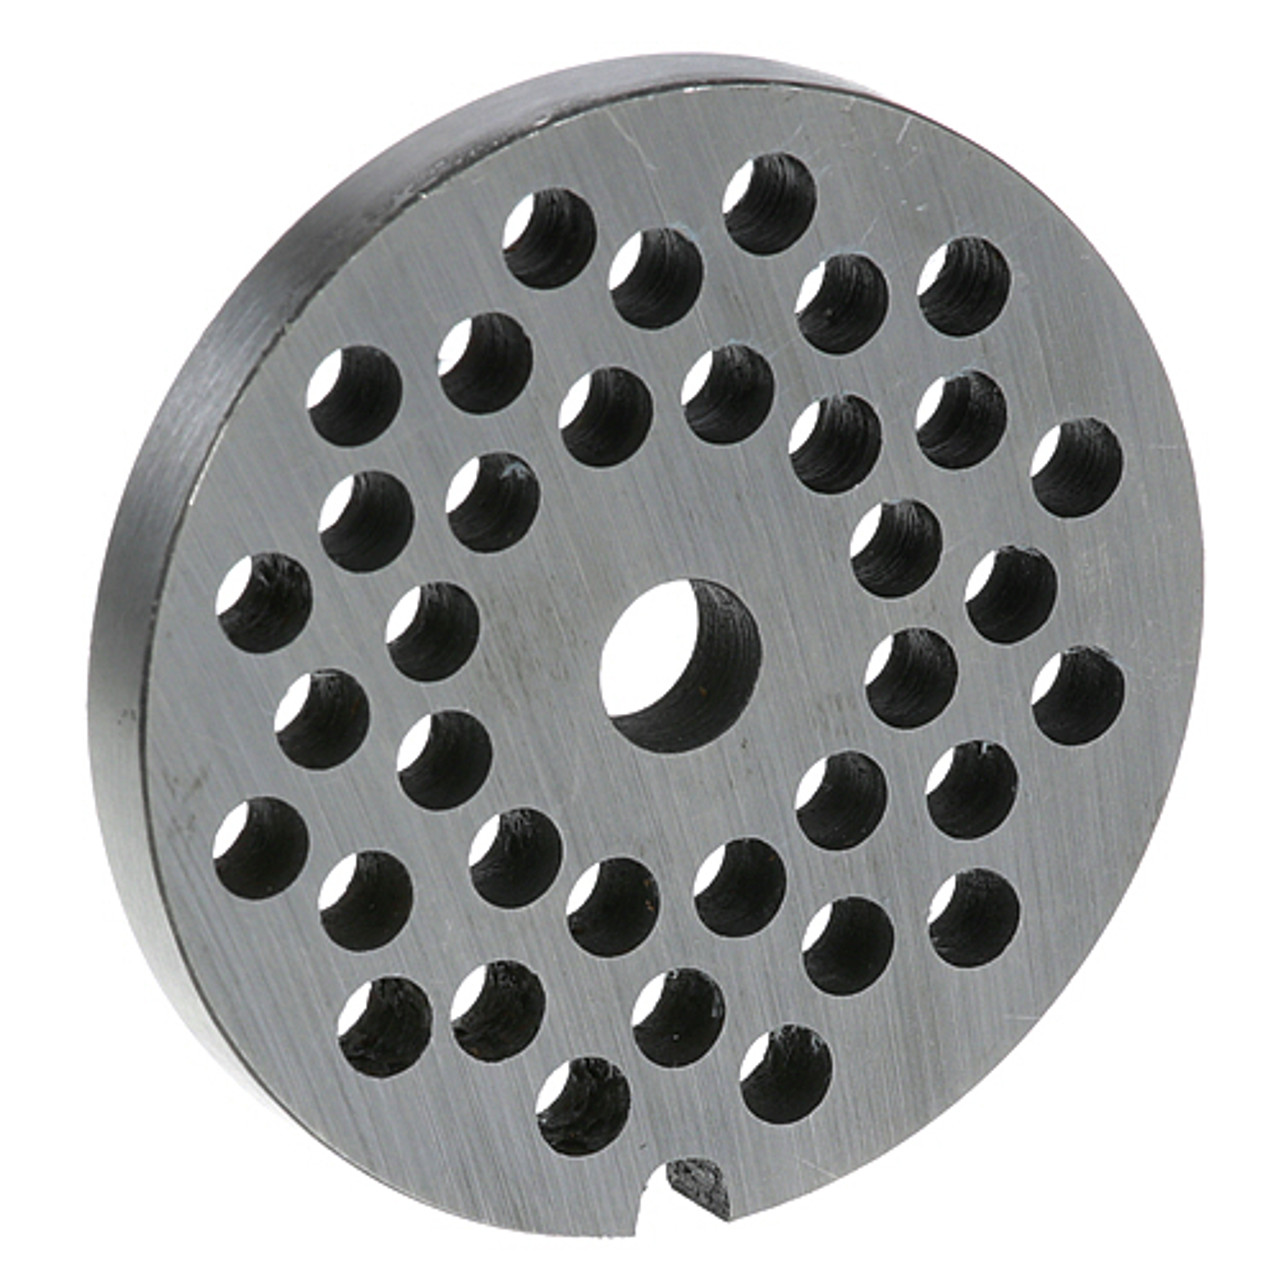 Grinder Plate - 1/4" - Replacement Part For Biro 1201-4A